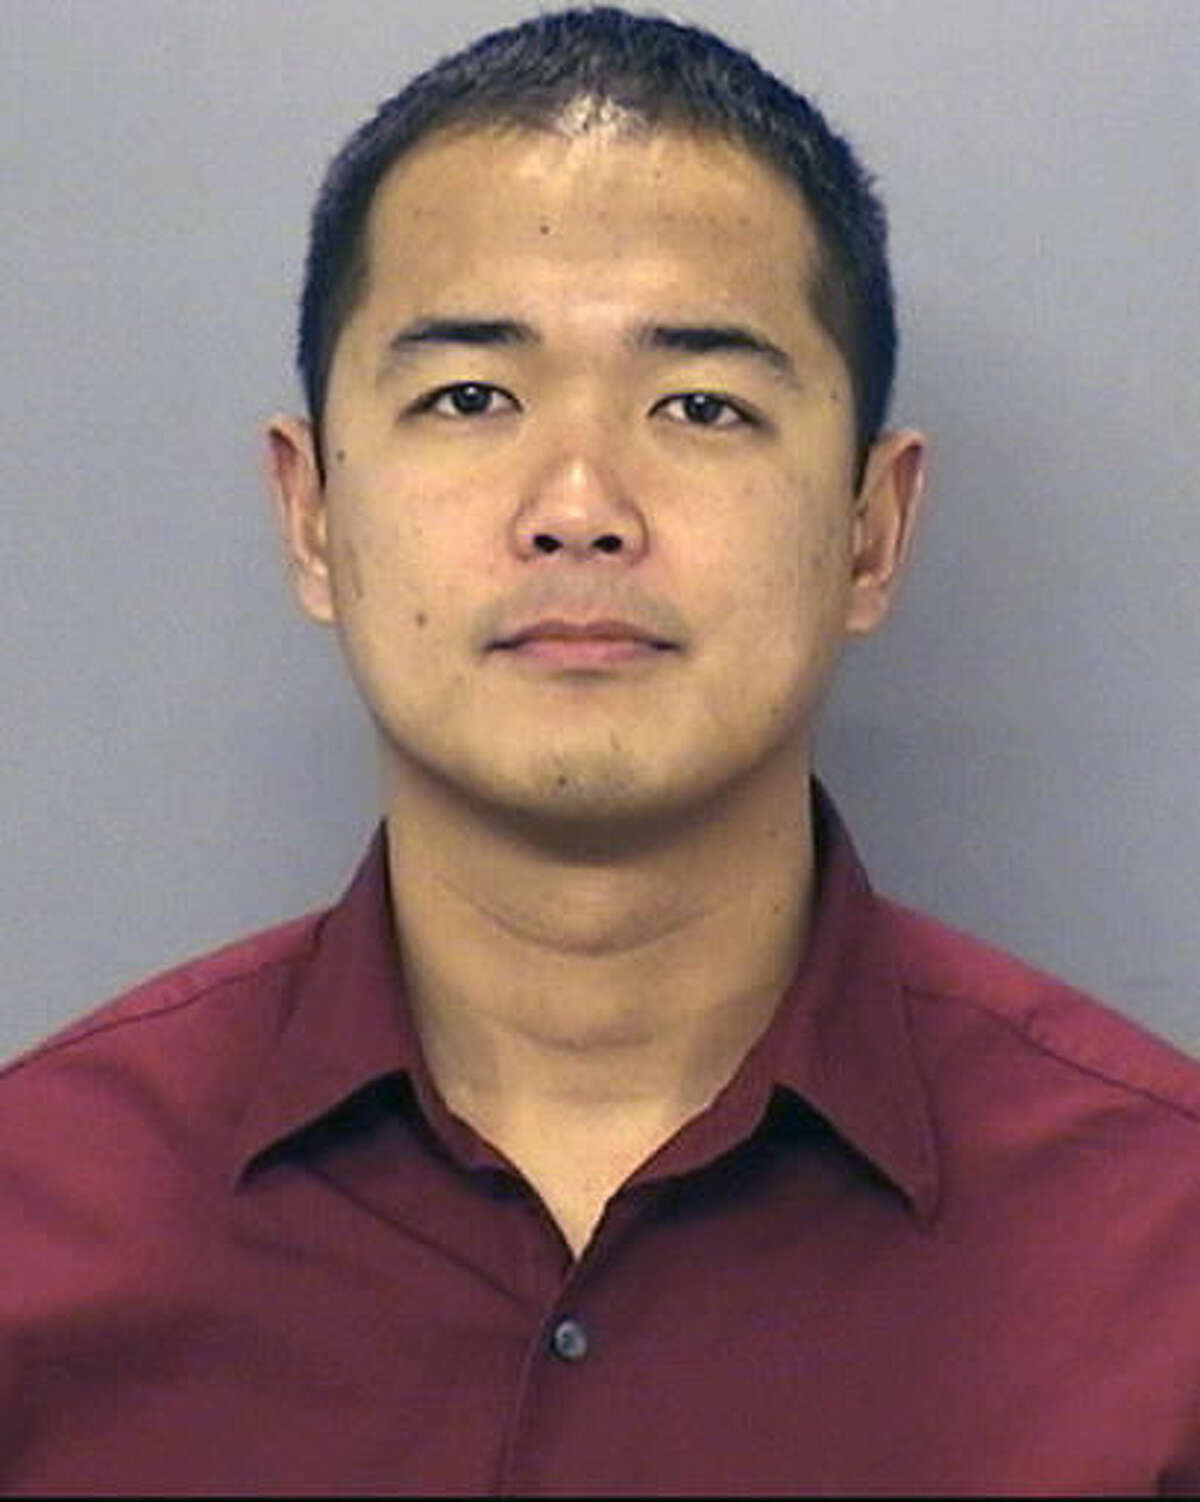 FILE - This undated file photo provided by the San Diego Police Department shows San Diego Police officer Jonathan De Guzman who was killed in a shooting Thursday, July 28, 2016. De Guzman, a 16-year veteran, is survived by a wife and two young children. The first of two memorial services will be held Thursday, Aug. 4, 2016, for De Guzman who was fatally shot during a traffic stop. De Guzman was shot five times at close range while in the driver's seat of his patrol car. His partner, 32-year-old Wade Irwin, was shot in the throat but is expected to recover. (San Diego Police Department via AP, File)